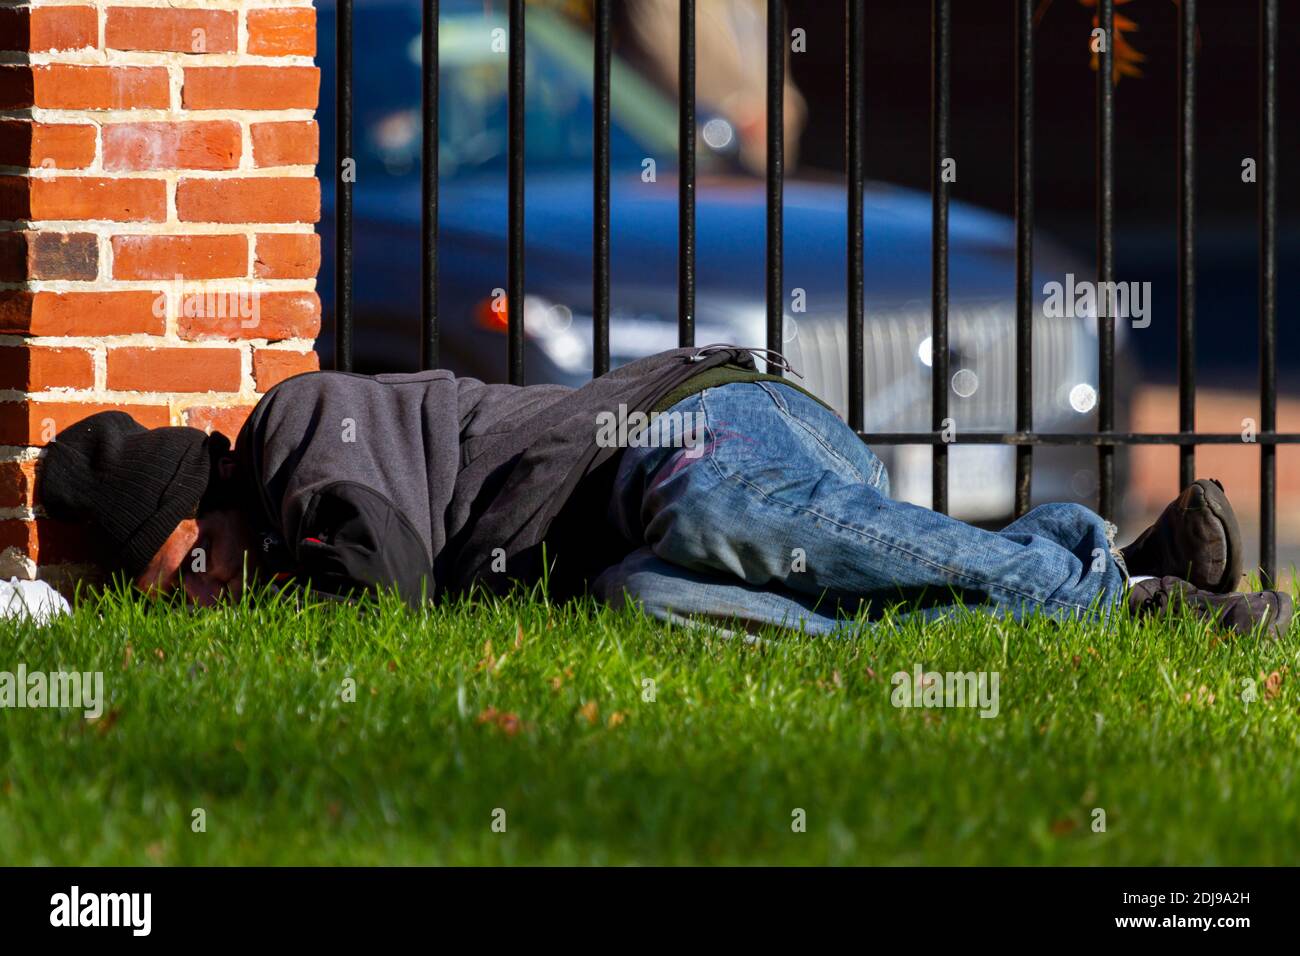 Alexandria, VA, USA  11-28-2020: A homeless latino man wearing sweatshirt and jeans is sleeping on the grass outdoors at a city park by a brick wall a Stock Photo